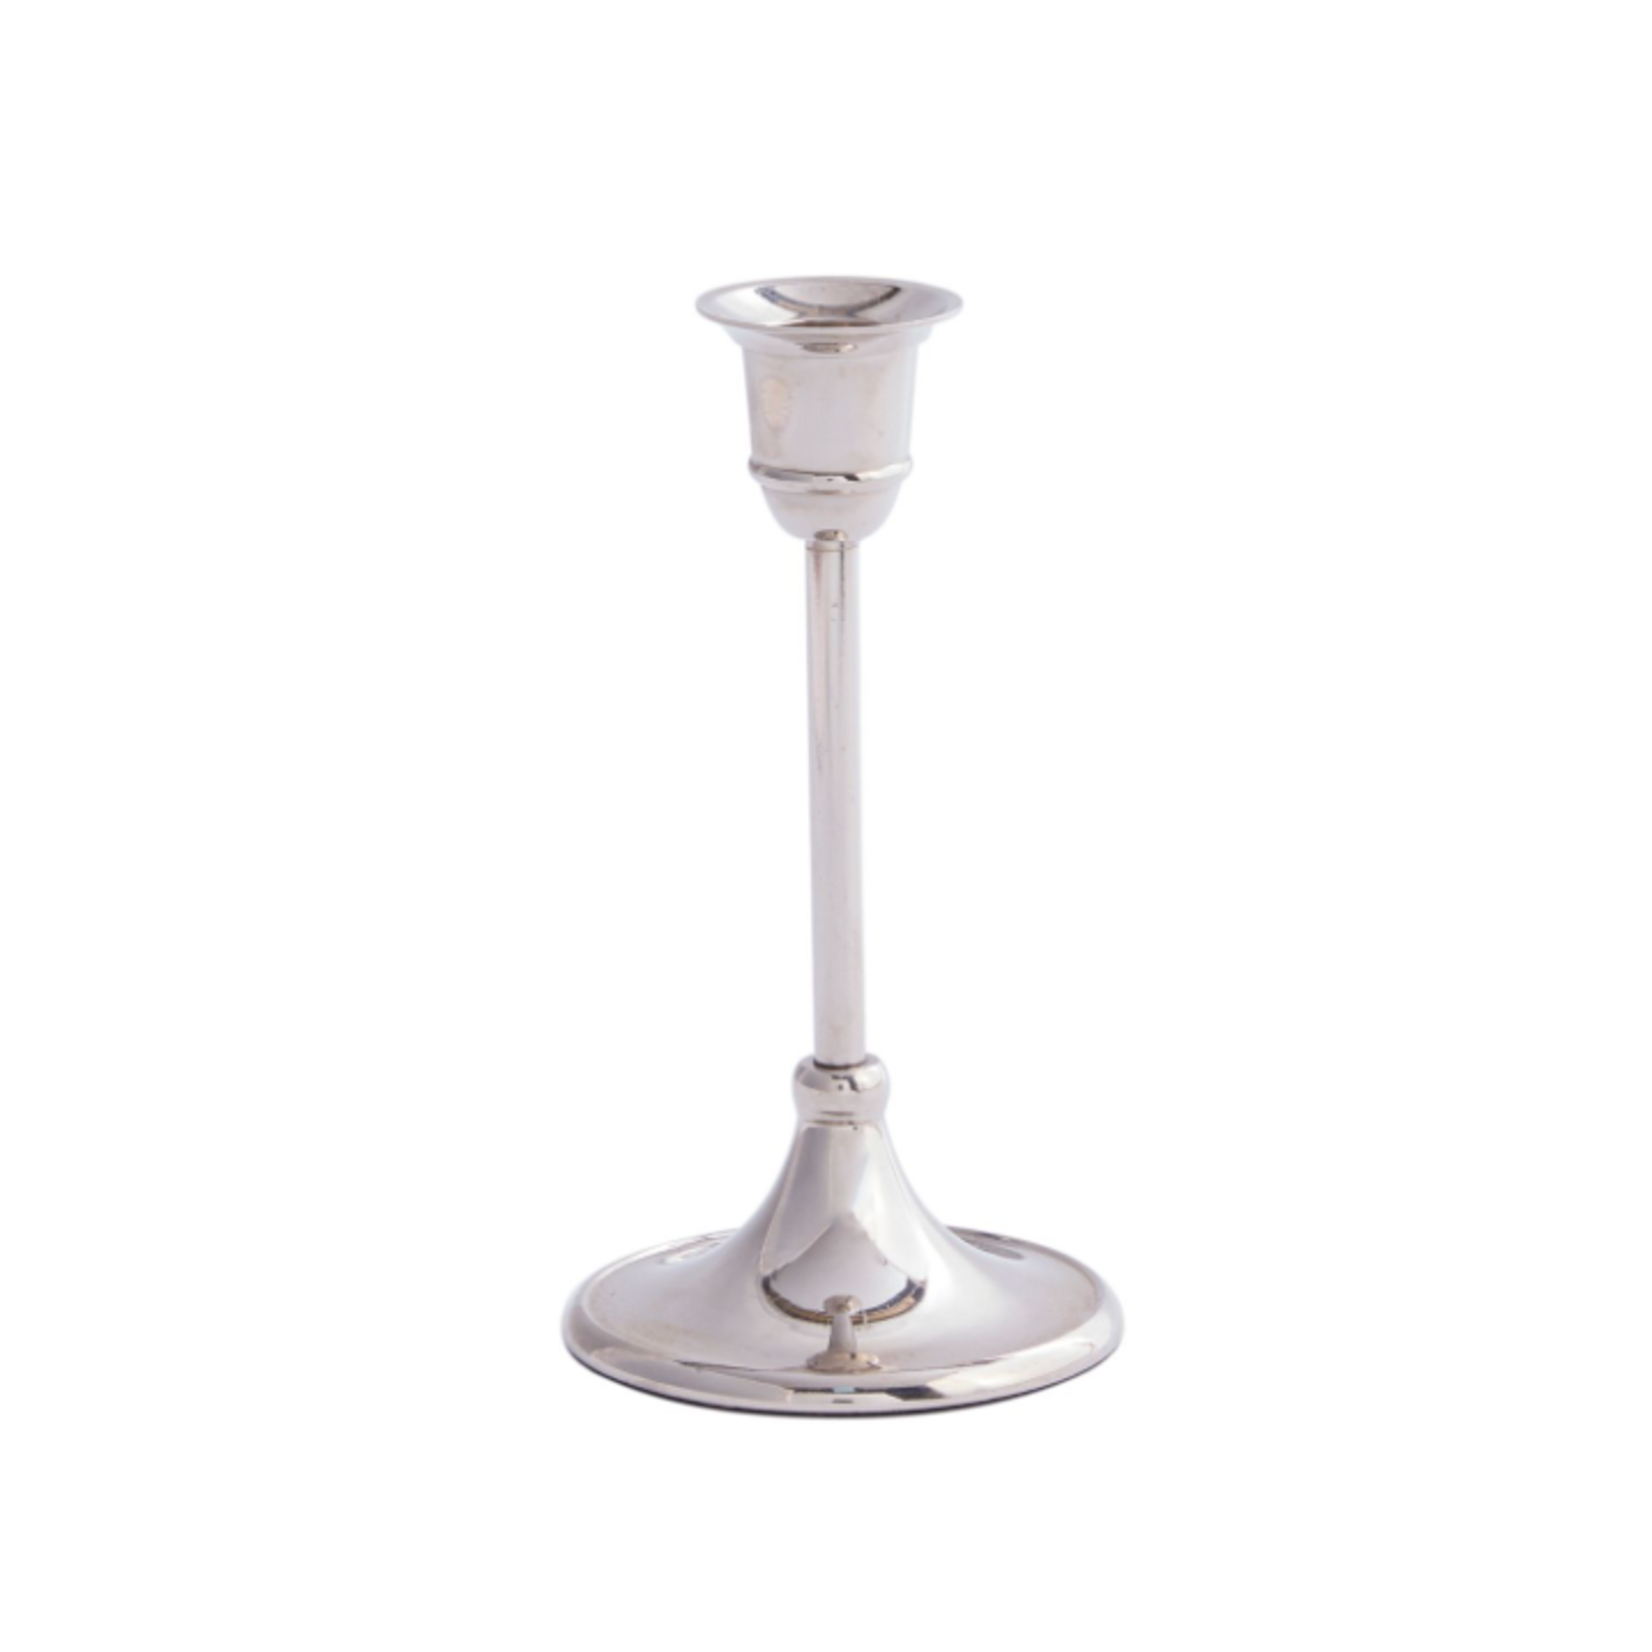 6"h x 3.25" SILVER ANTIQUE CANDLE HOLDER